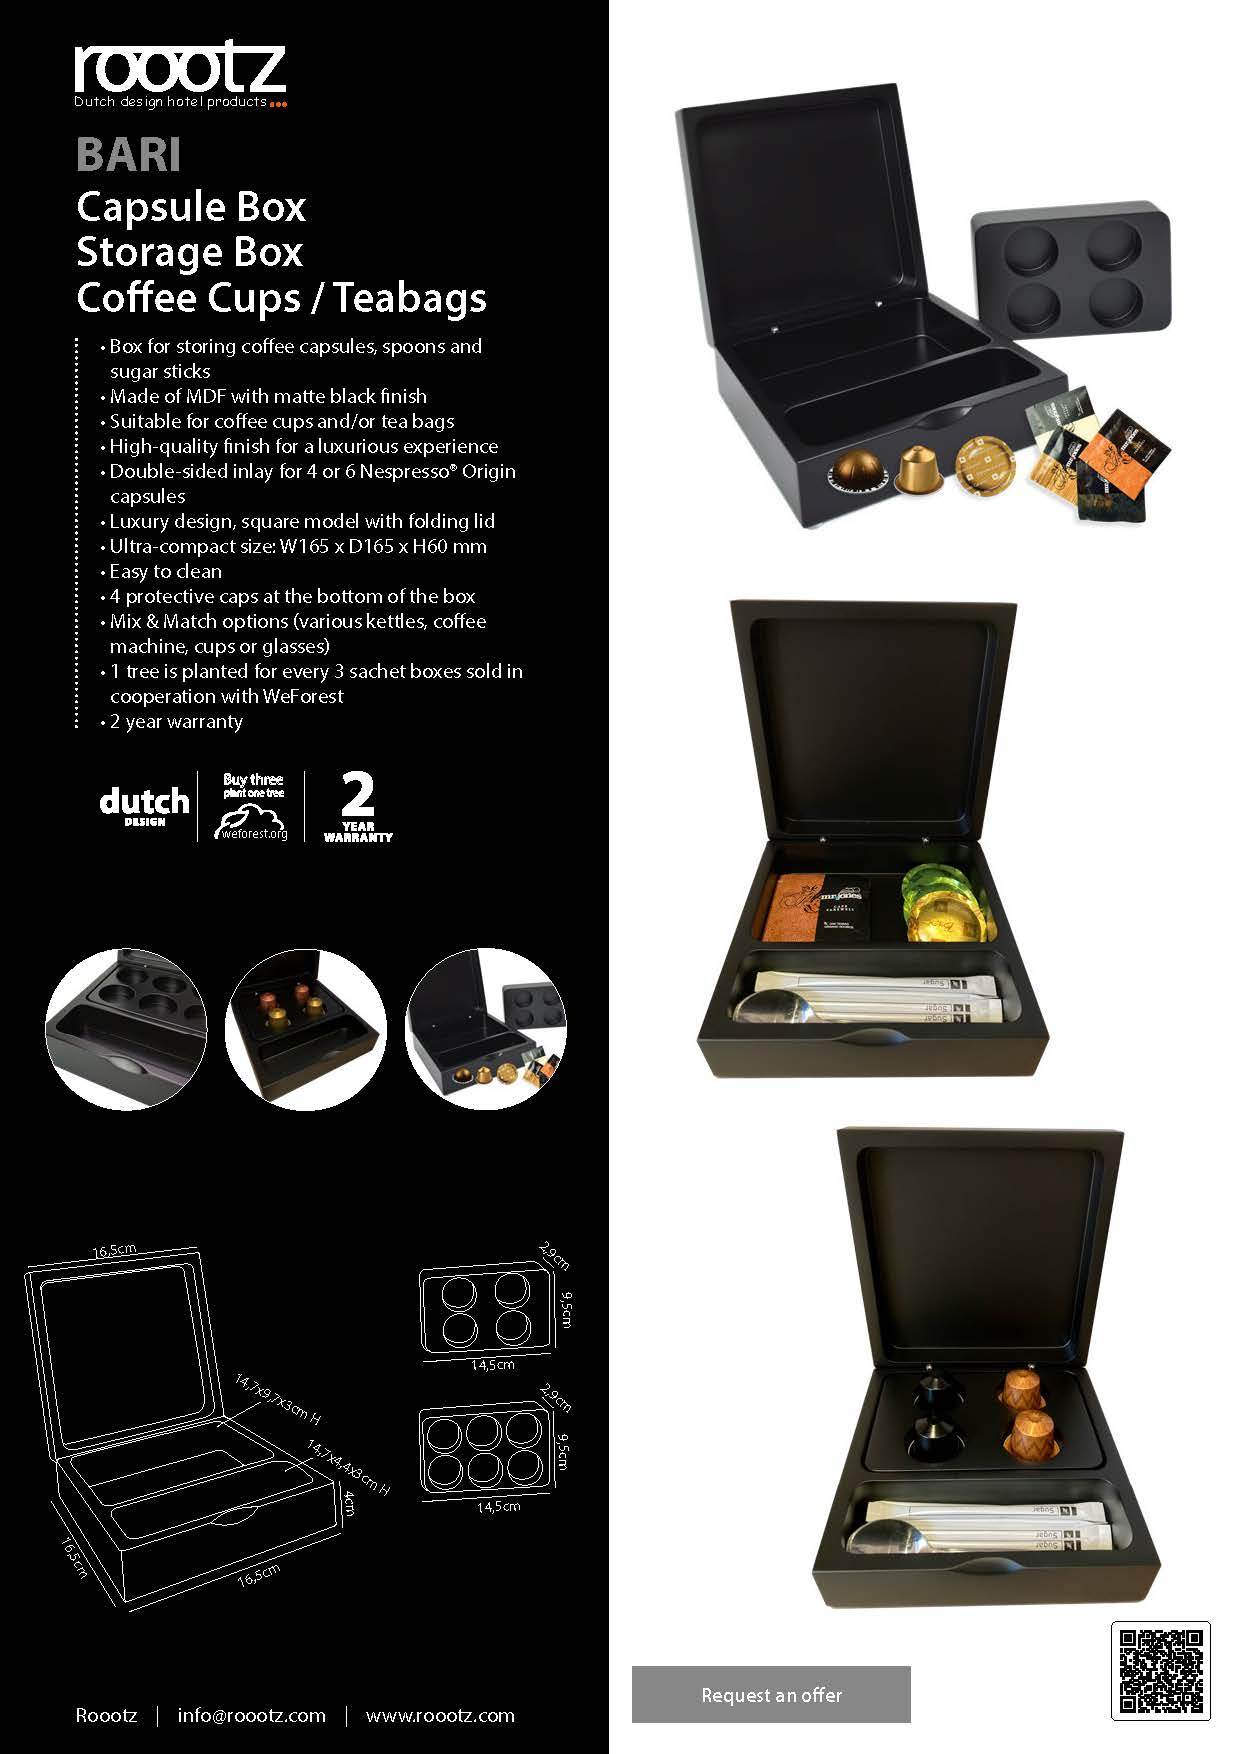 Box for Coffee Cups and tea bags for hotels - storage box / capsule box